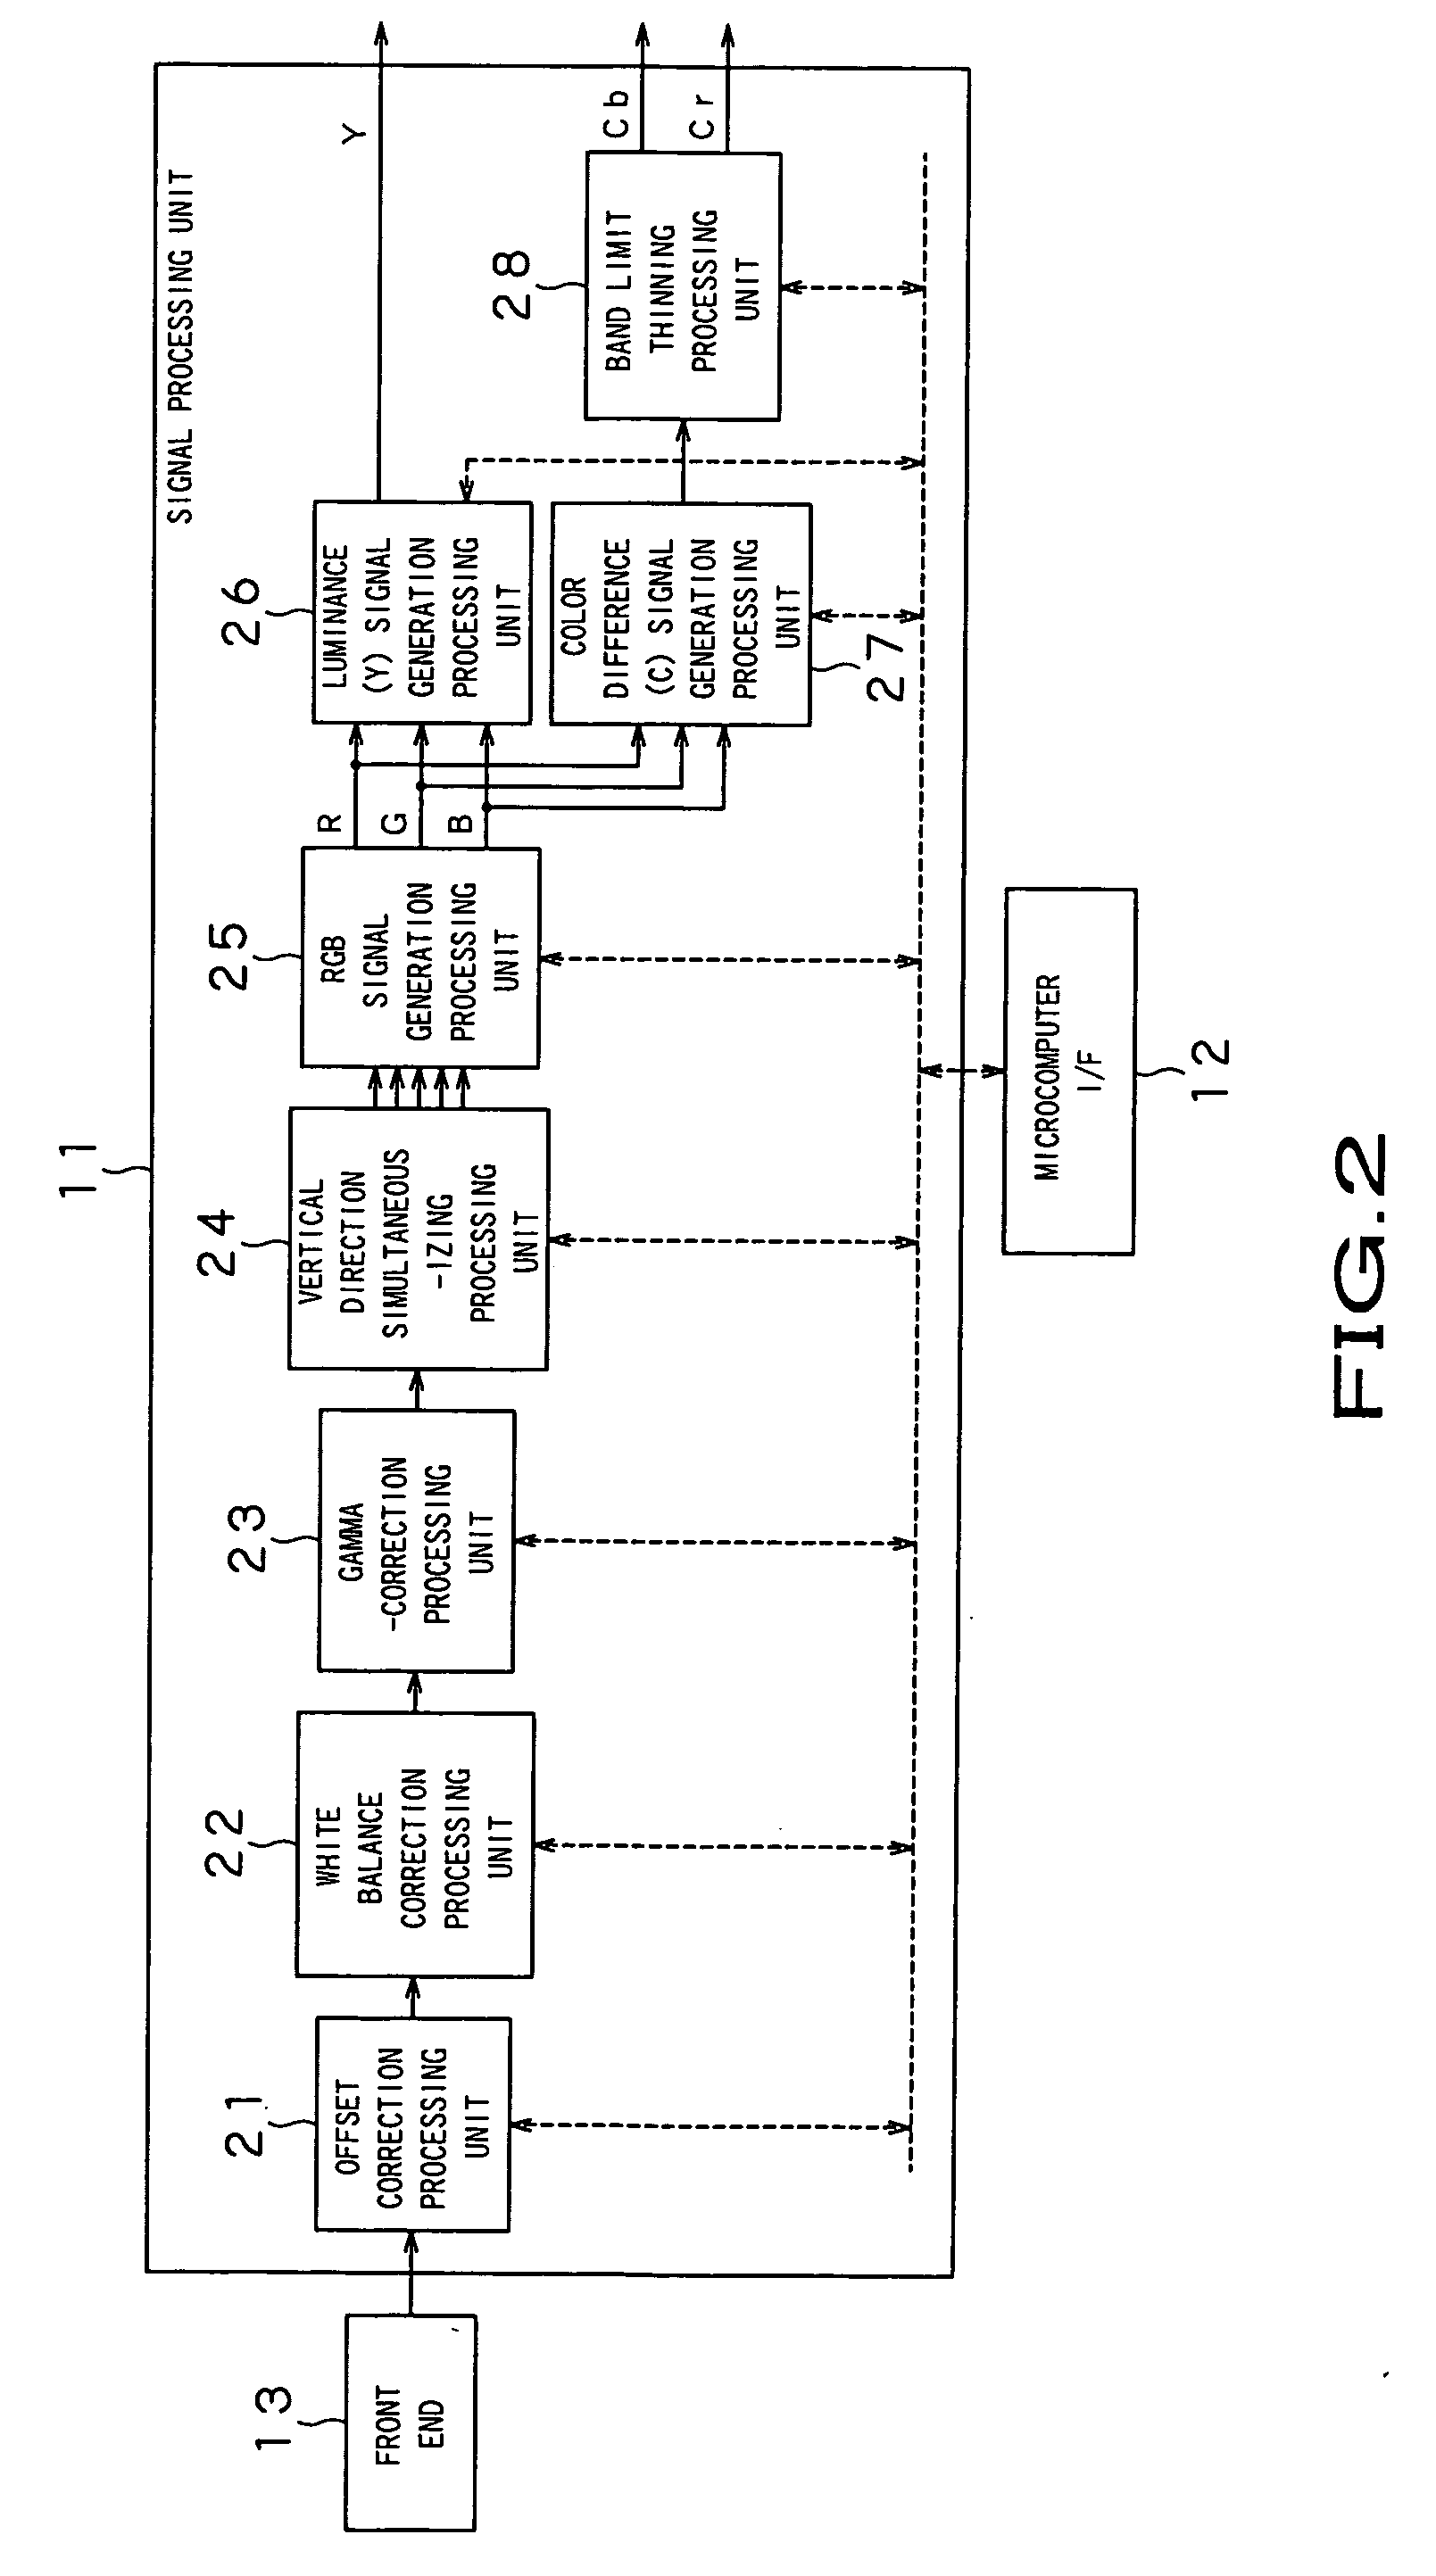 Image pickup device and method